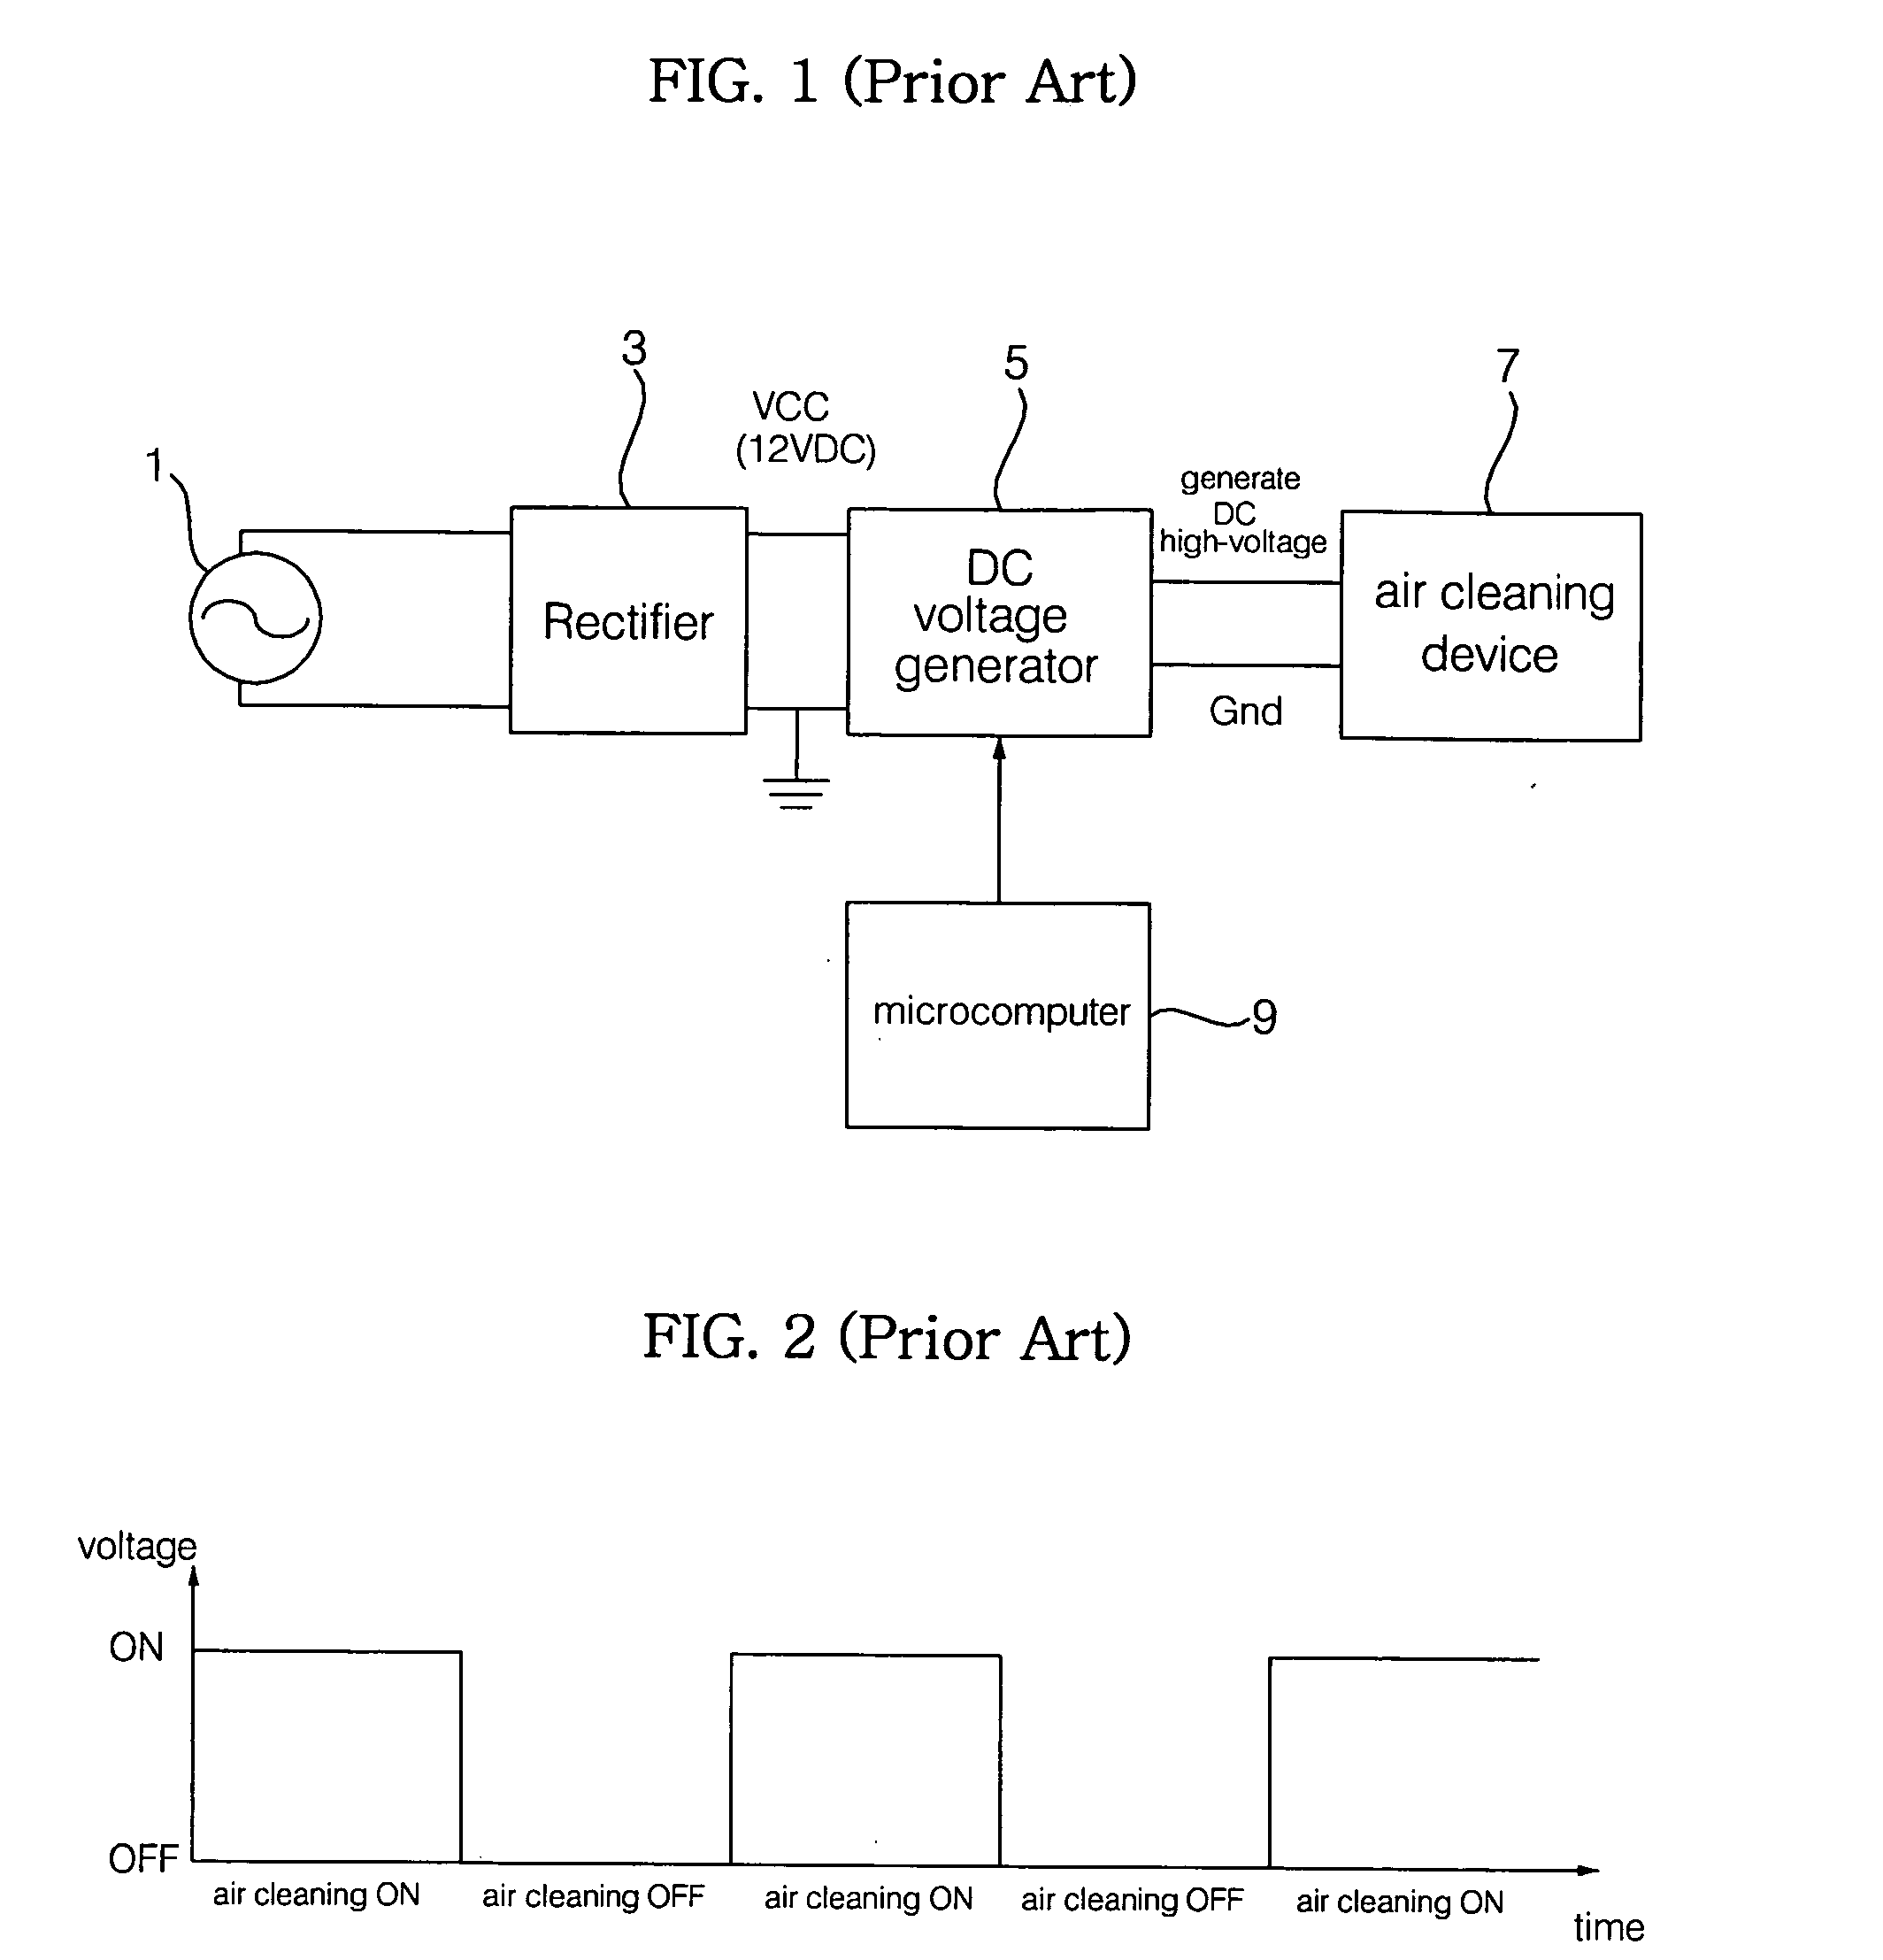 Apparatus and method for controlling air cleaning